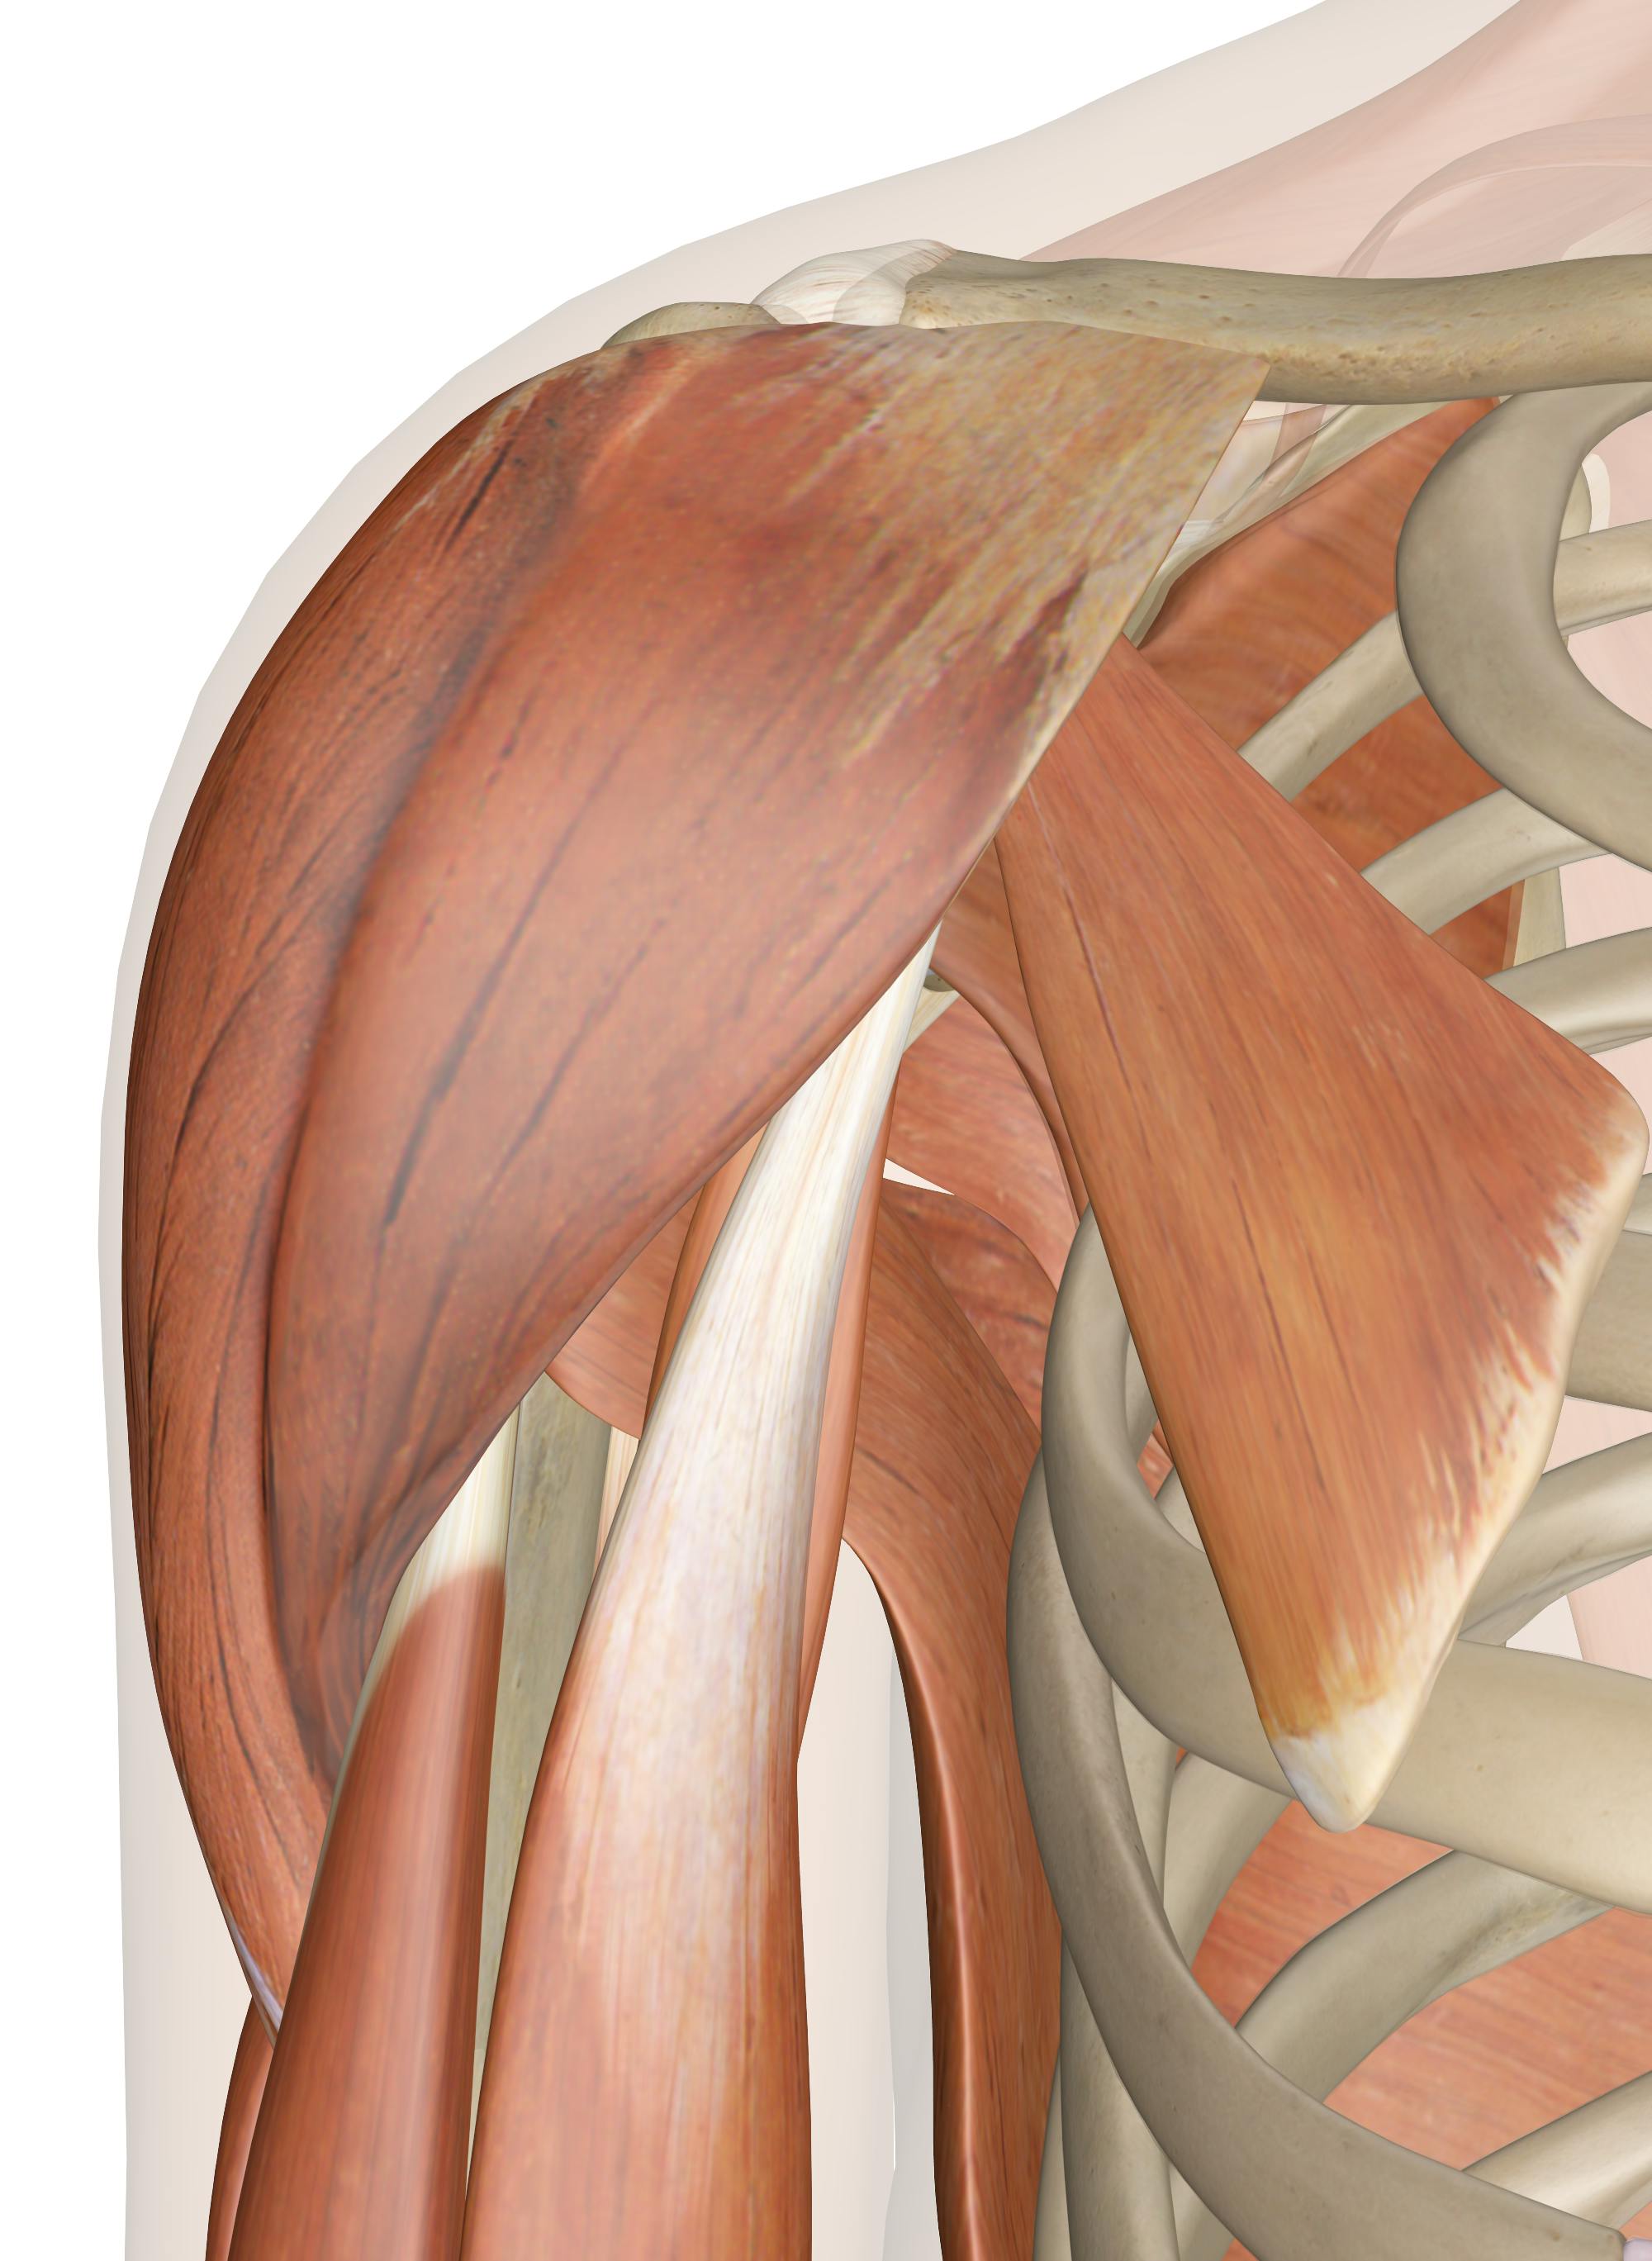 Muscles of the Shoulder - Anatomy Pictures and Information